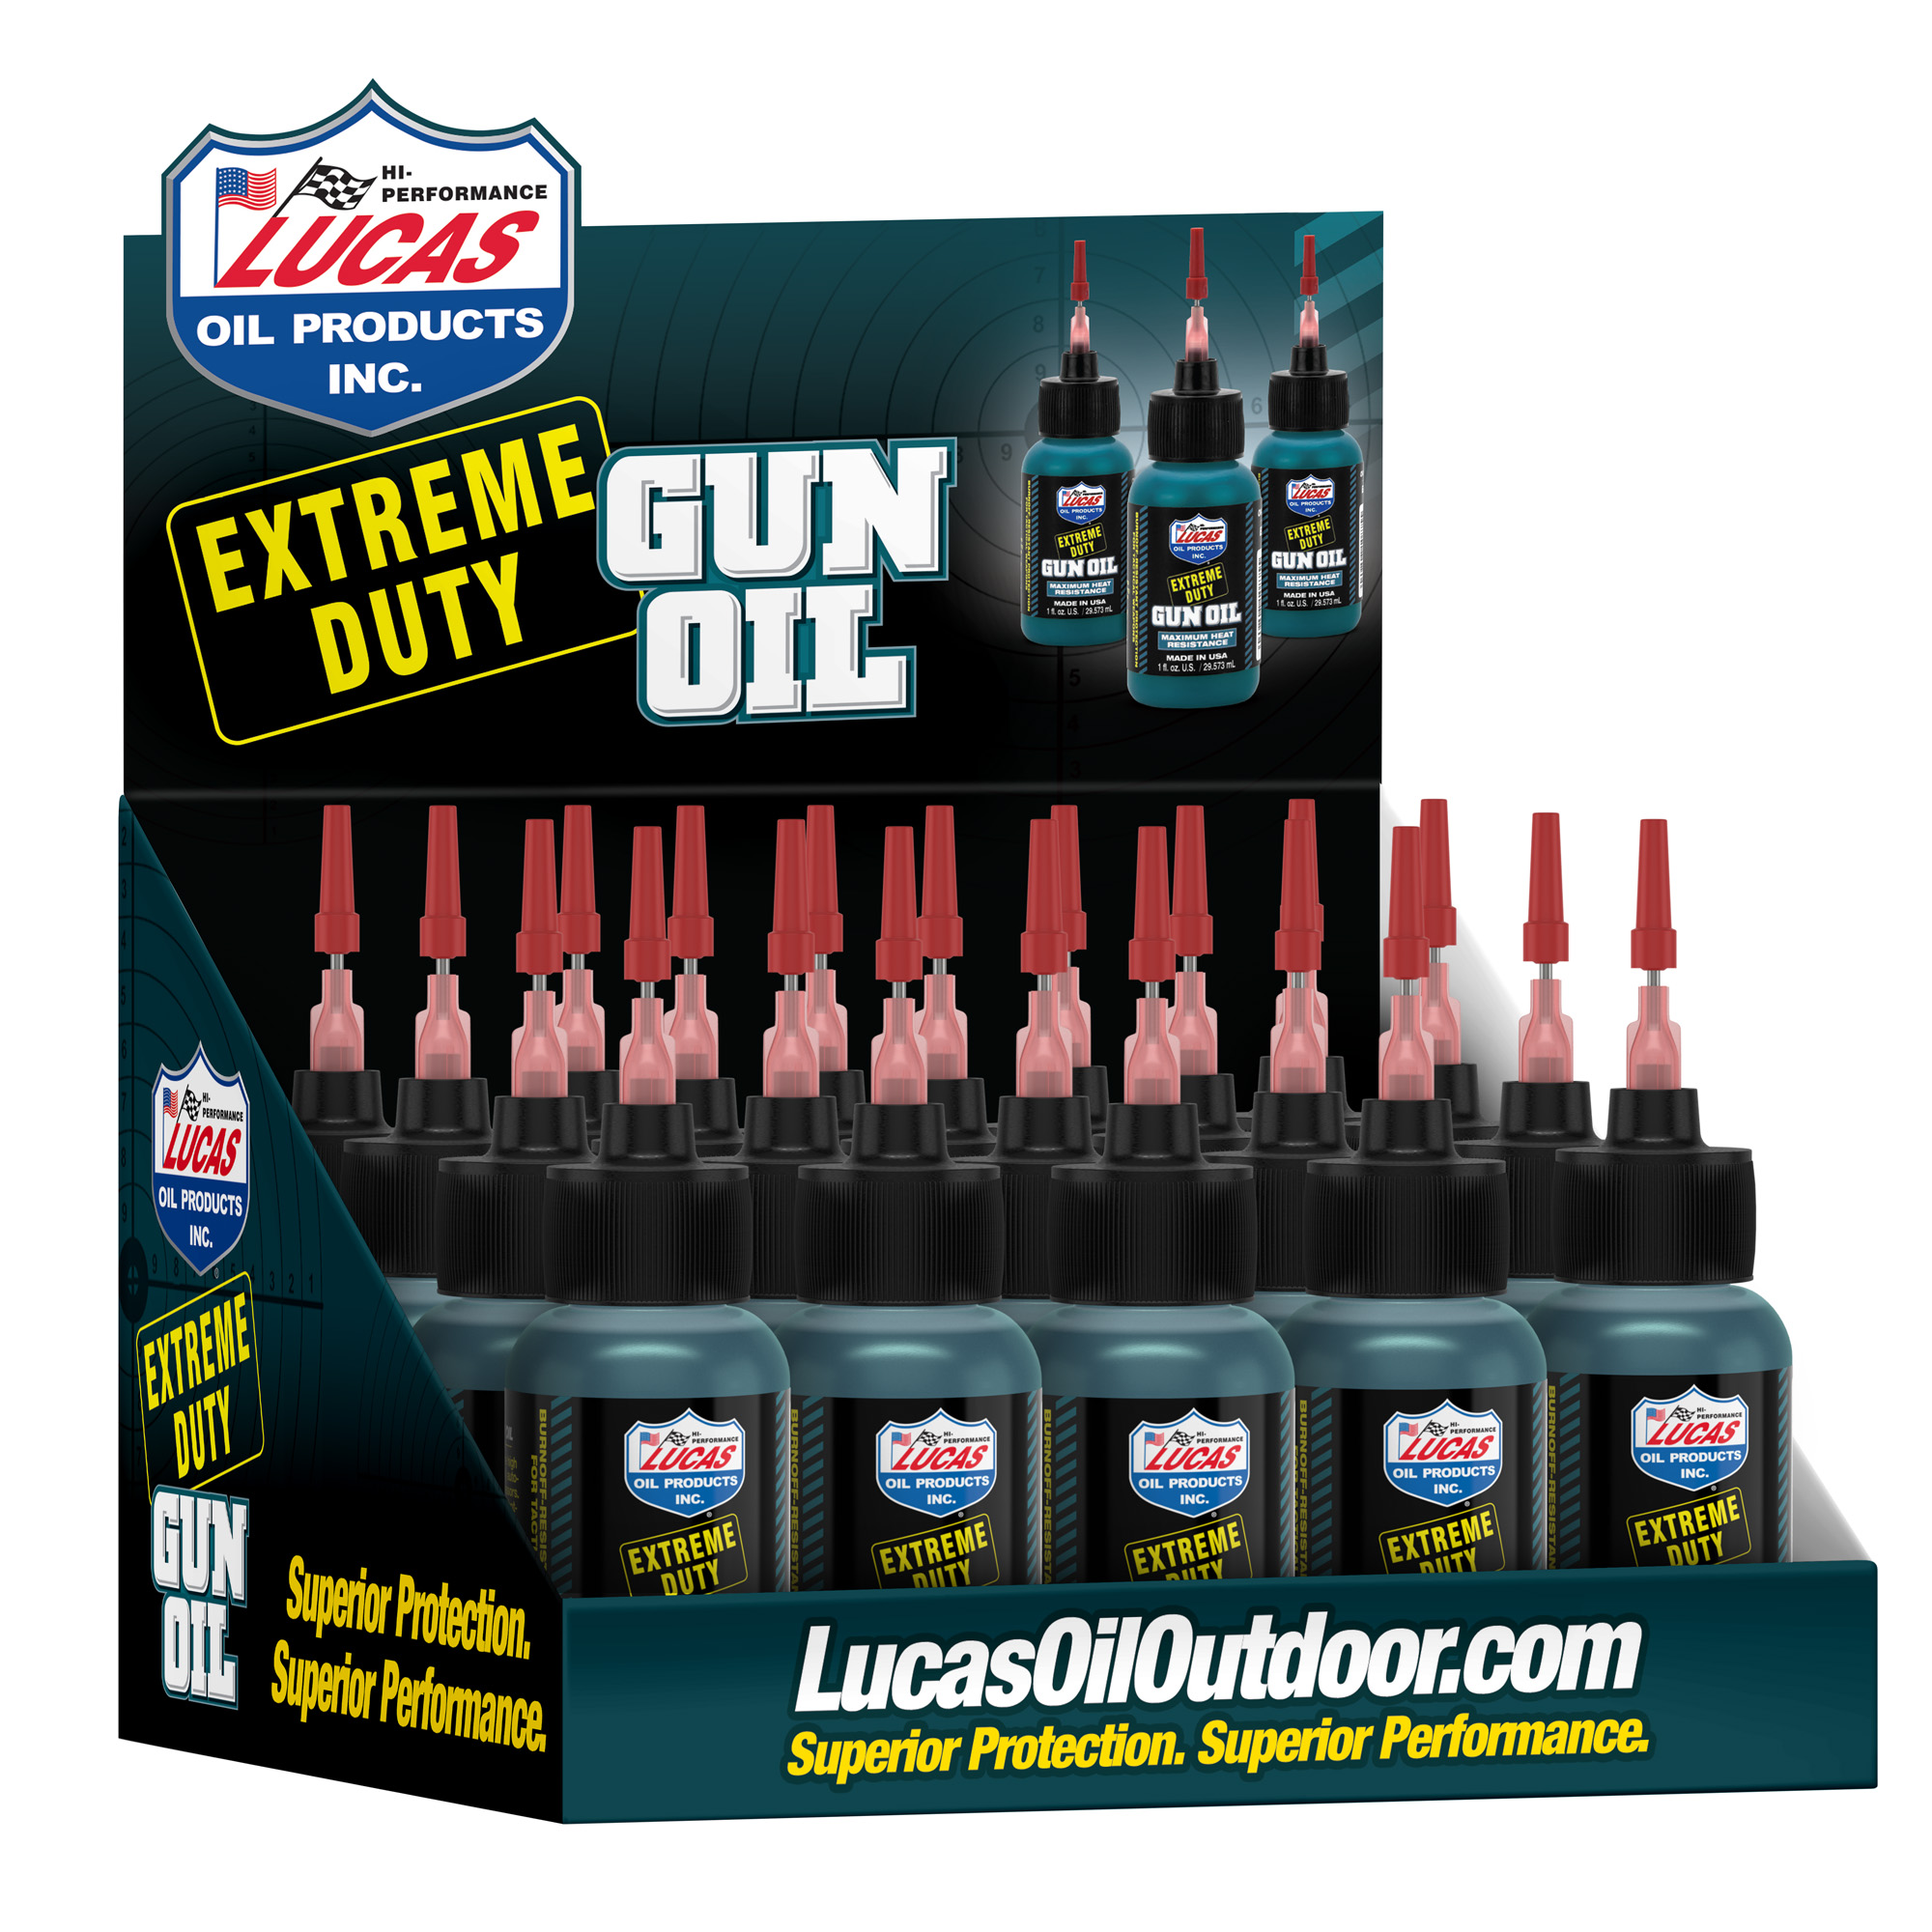 LUCAS OIL Gun Rifle Cleaning Oil Kit Bundle with Oil , Grease & Bore  Solvent Cleaner 